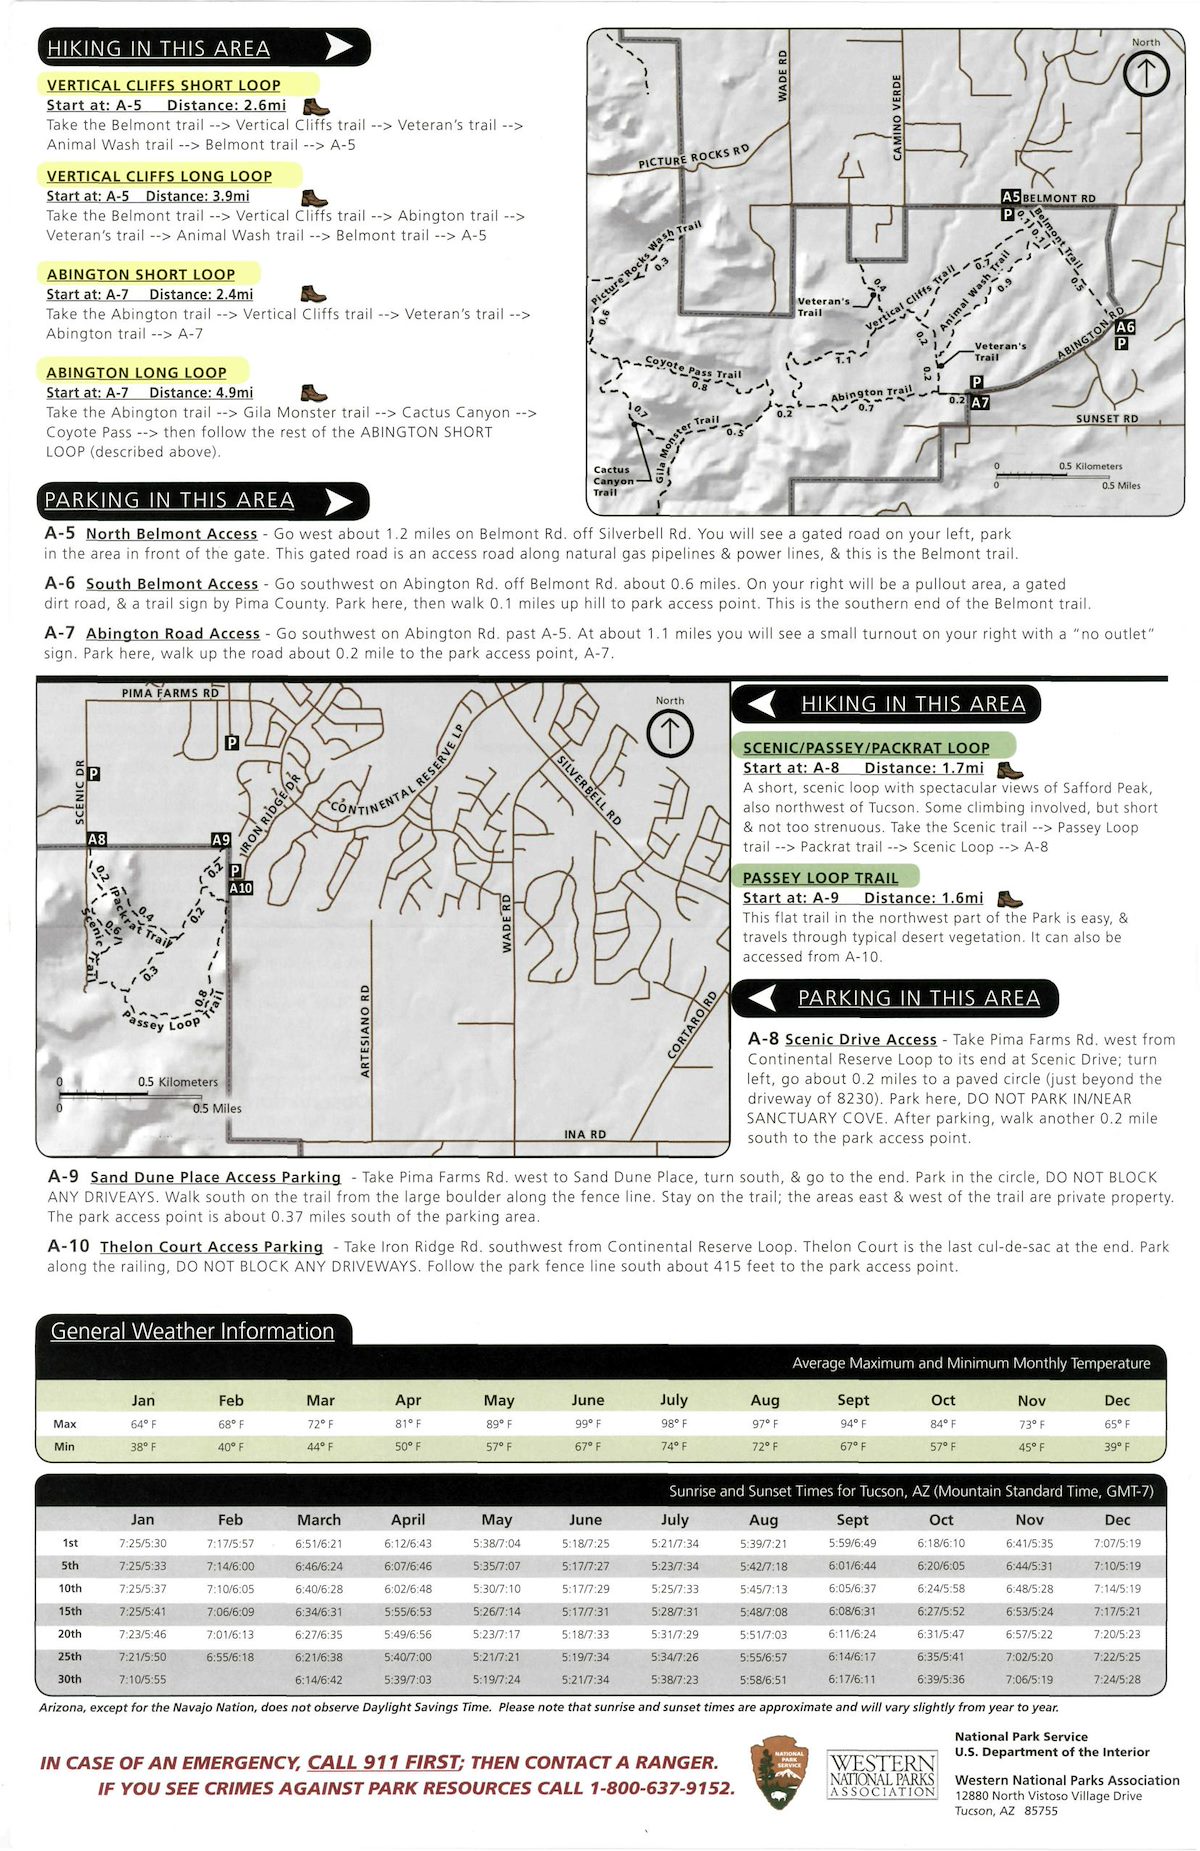 Saguaro National Park - West - Tucson Mountain District - Hiking Guide - 2019 - Page 3